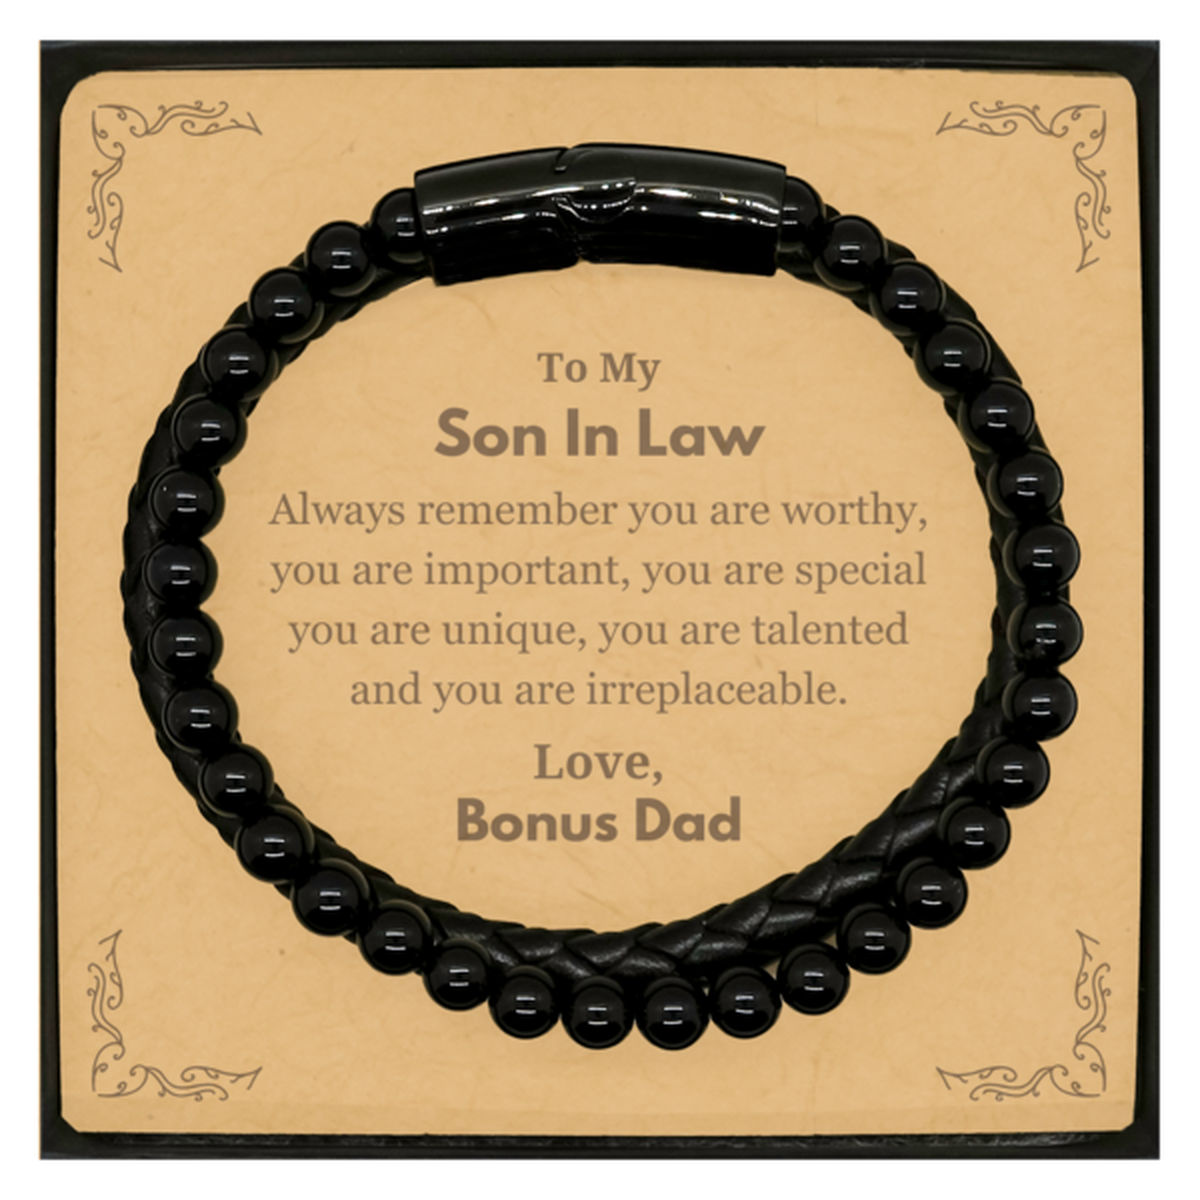 Son In Law Birthday Gifts from Bonus Dad, Inspirational Stone Leather Bracelets for Son In Law Christmas Graduation Gifts for Son In Law Always remember you are worthy, you are important. Love, Bonus Dad